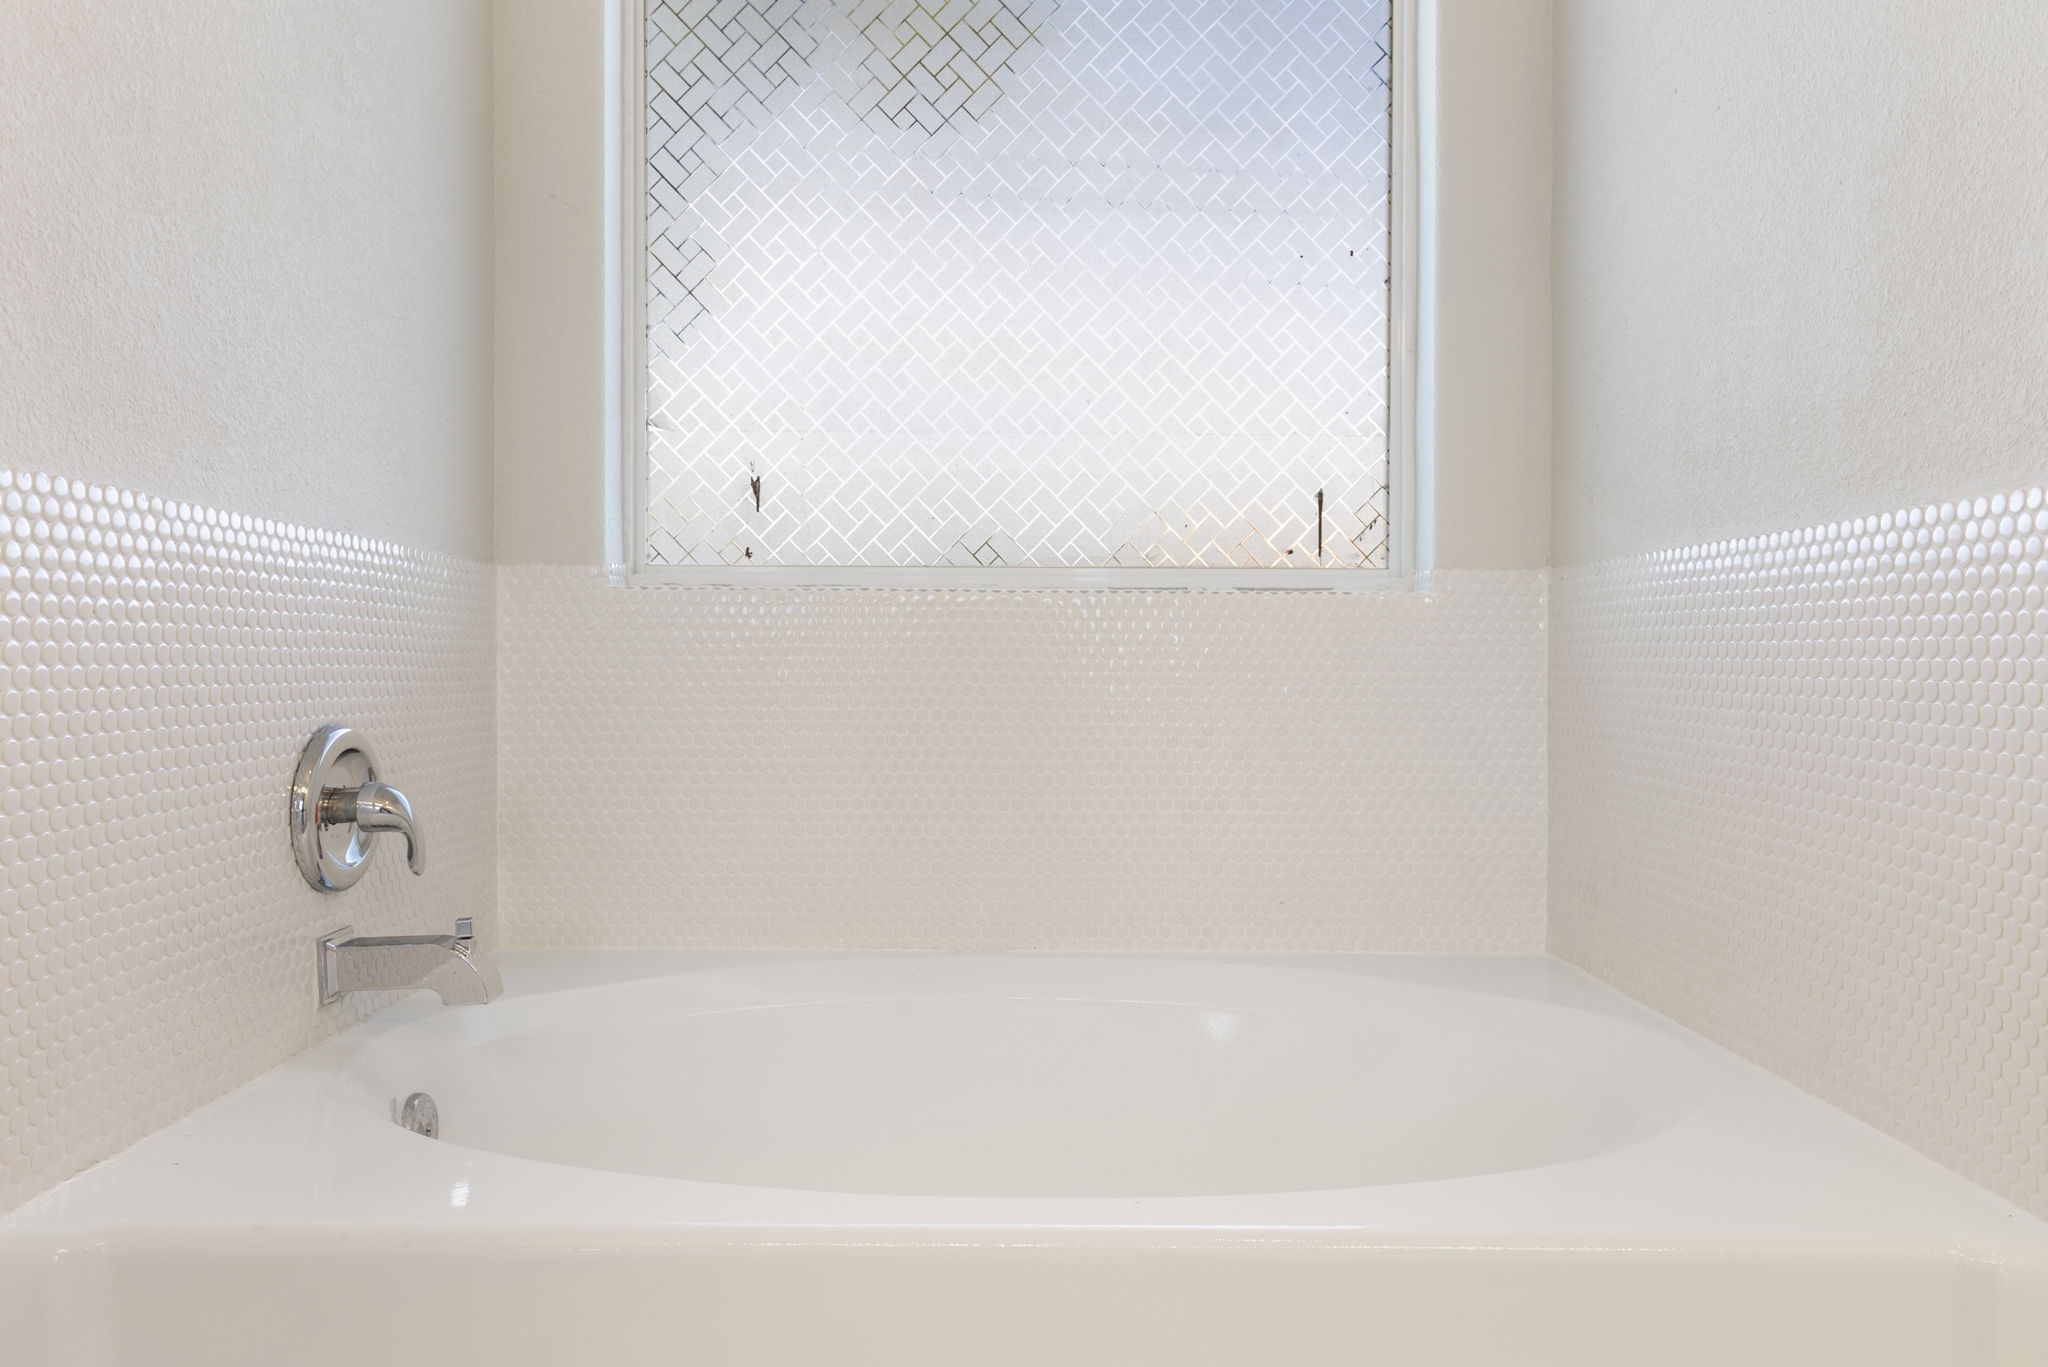 Relax in the soaking tub with decorative tile surround and patterned window for privacy.